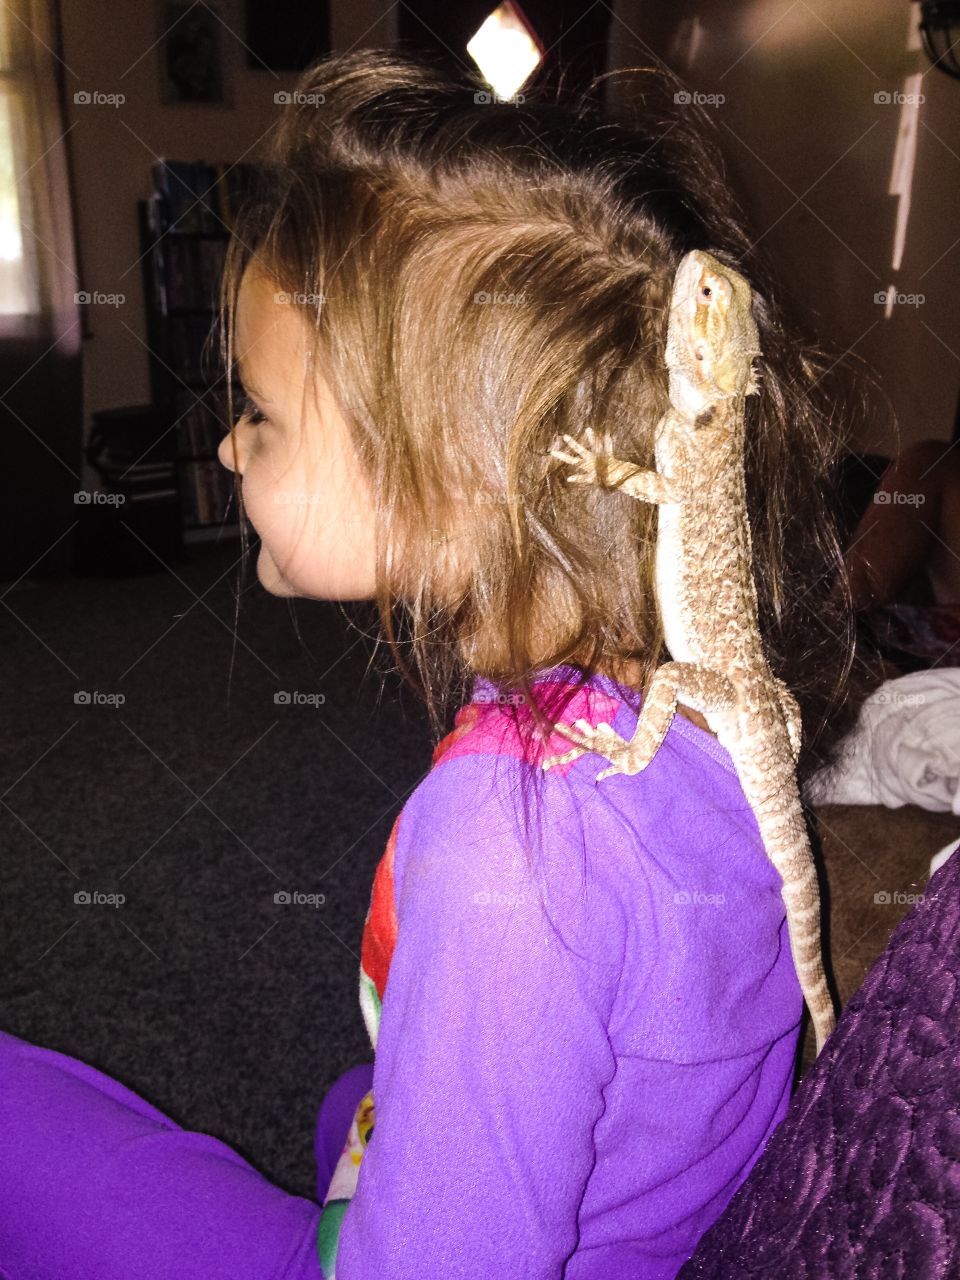 My daughter with her brother's bearded dragon, Spike.